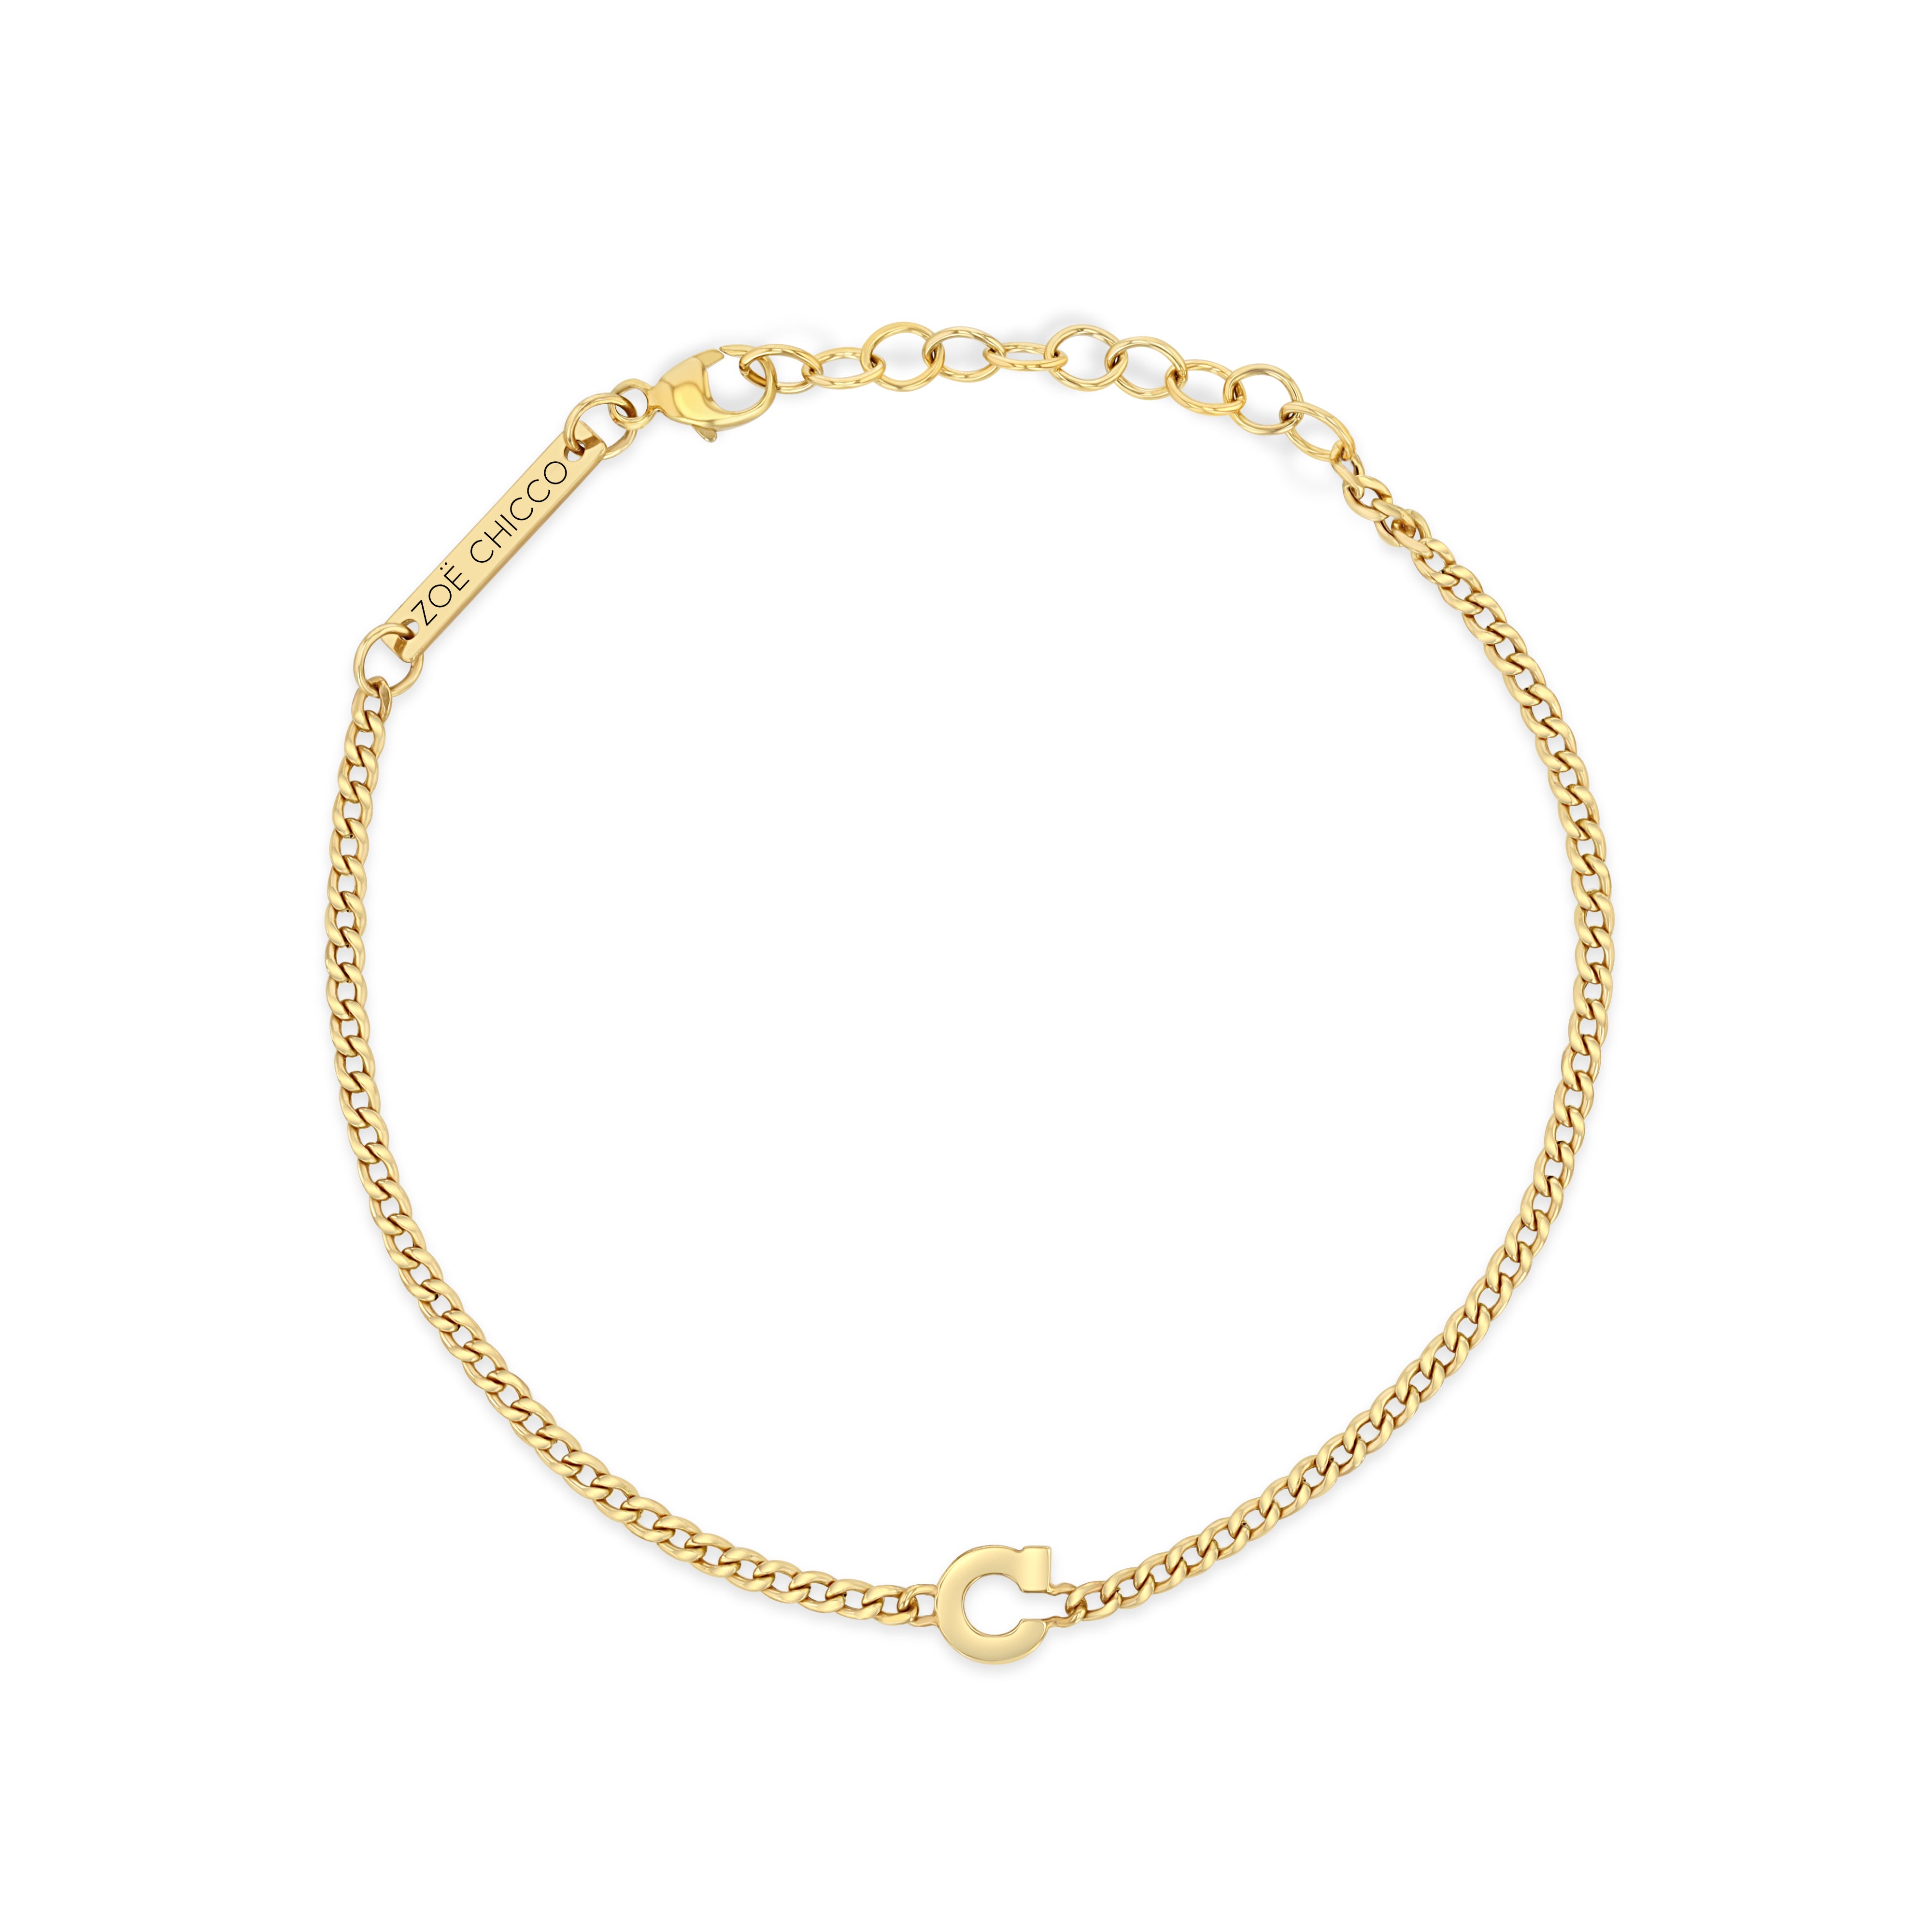 Buy 14K Gold Thin 3mm Cuban Curb Link Chain Bracelet for Women Teens Girls  725 Inches at Amazonin